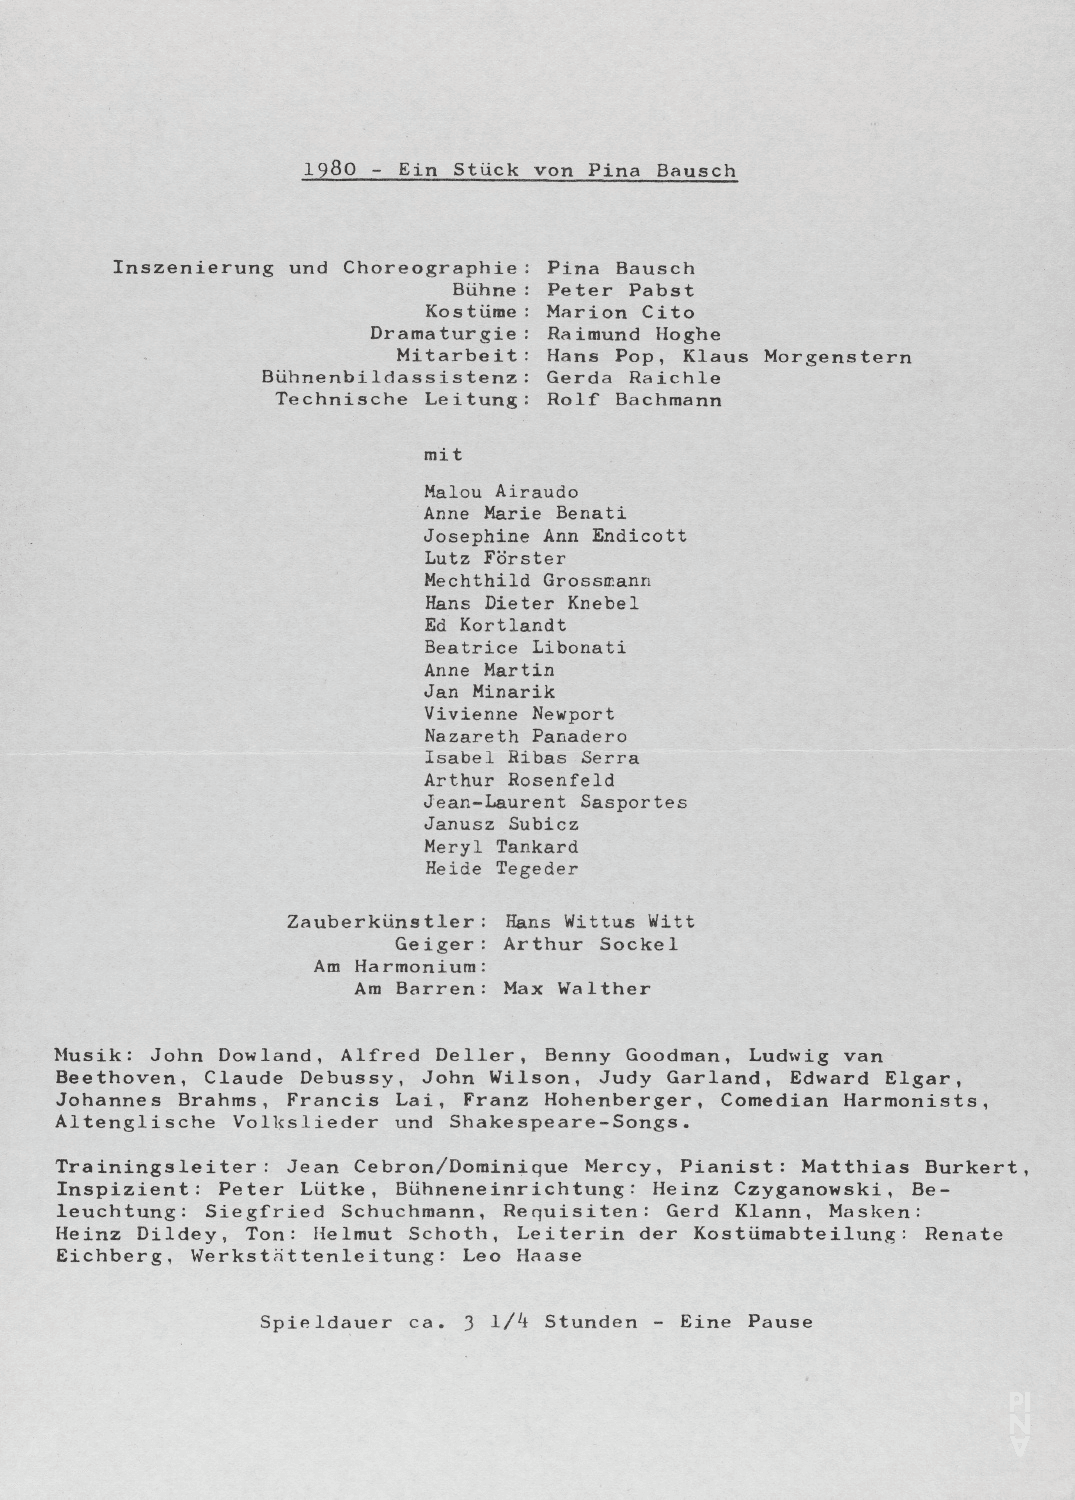 Evening leaflet for “1980 – A Piece by Pina Bausch” by Pina Bausch in in Wuppertal, season 1979/80